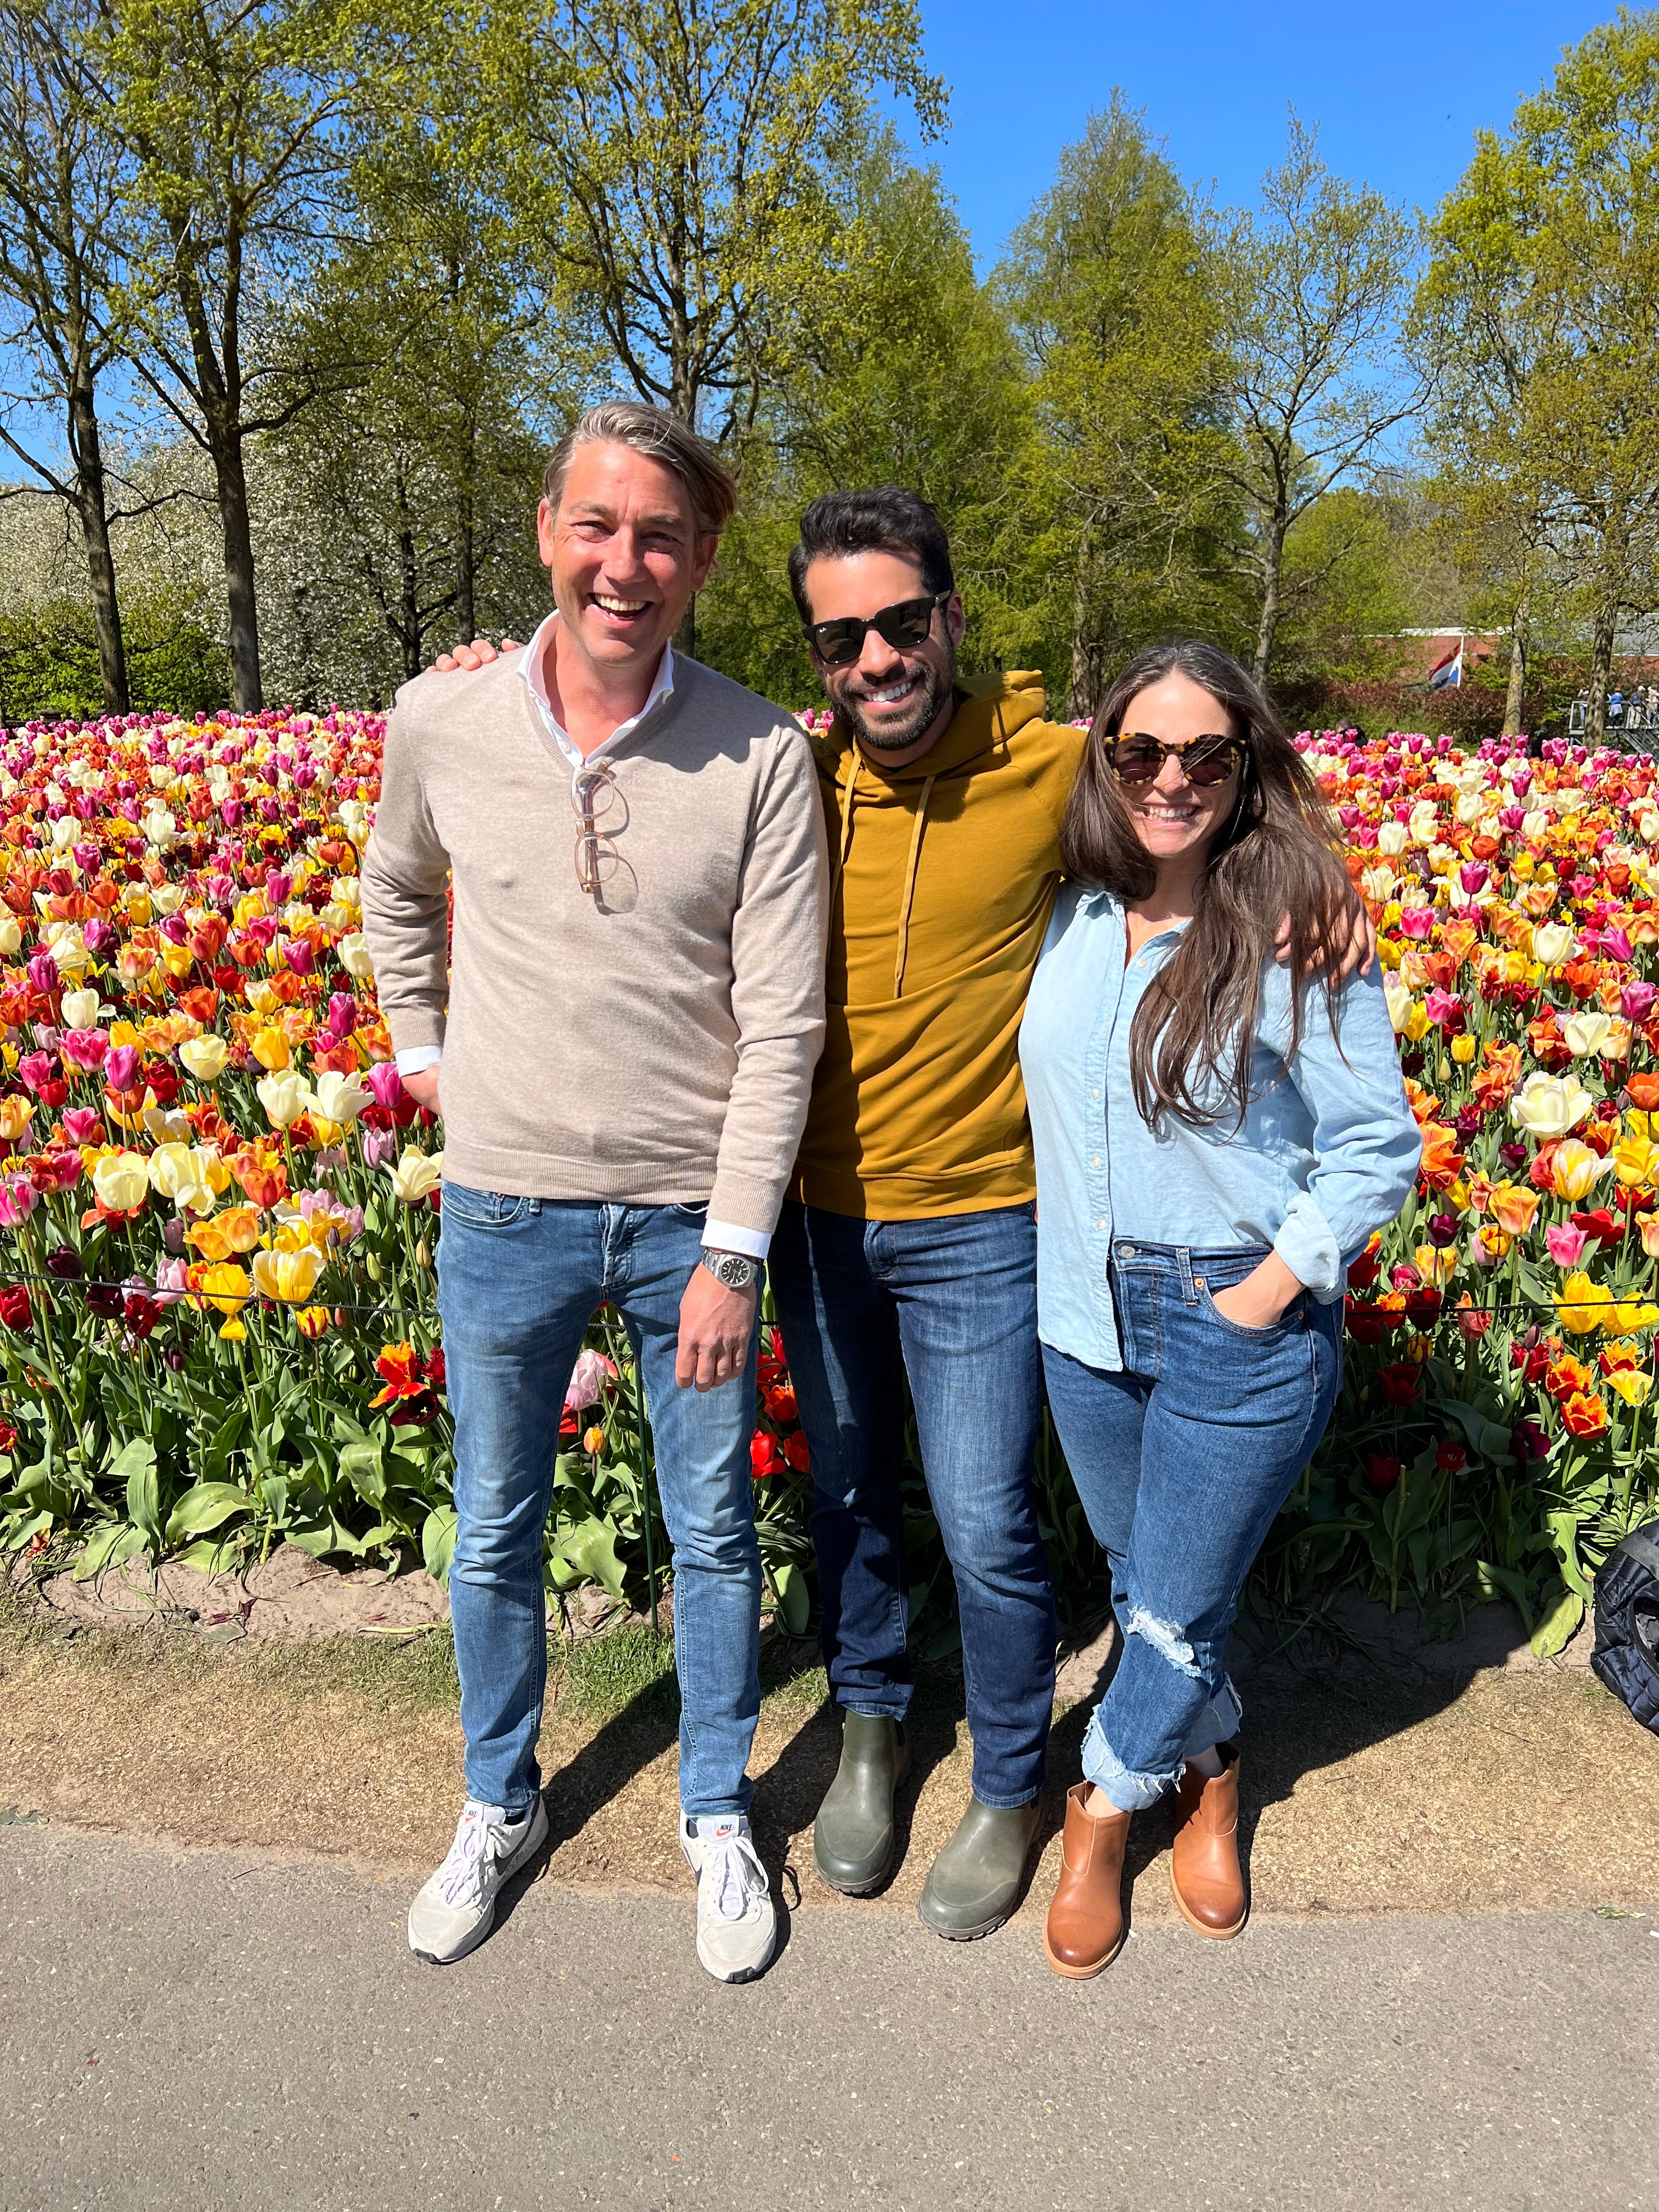 Meet the winners of the trip to Amsterdam - Holland visiting the tulip bulb fields with Ben, owner of DutchGrown Flower Bulbs